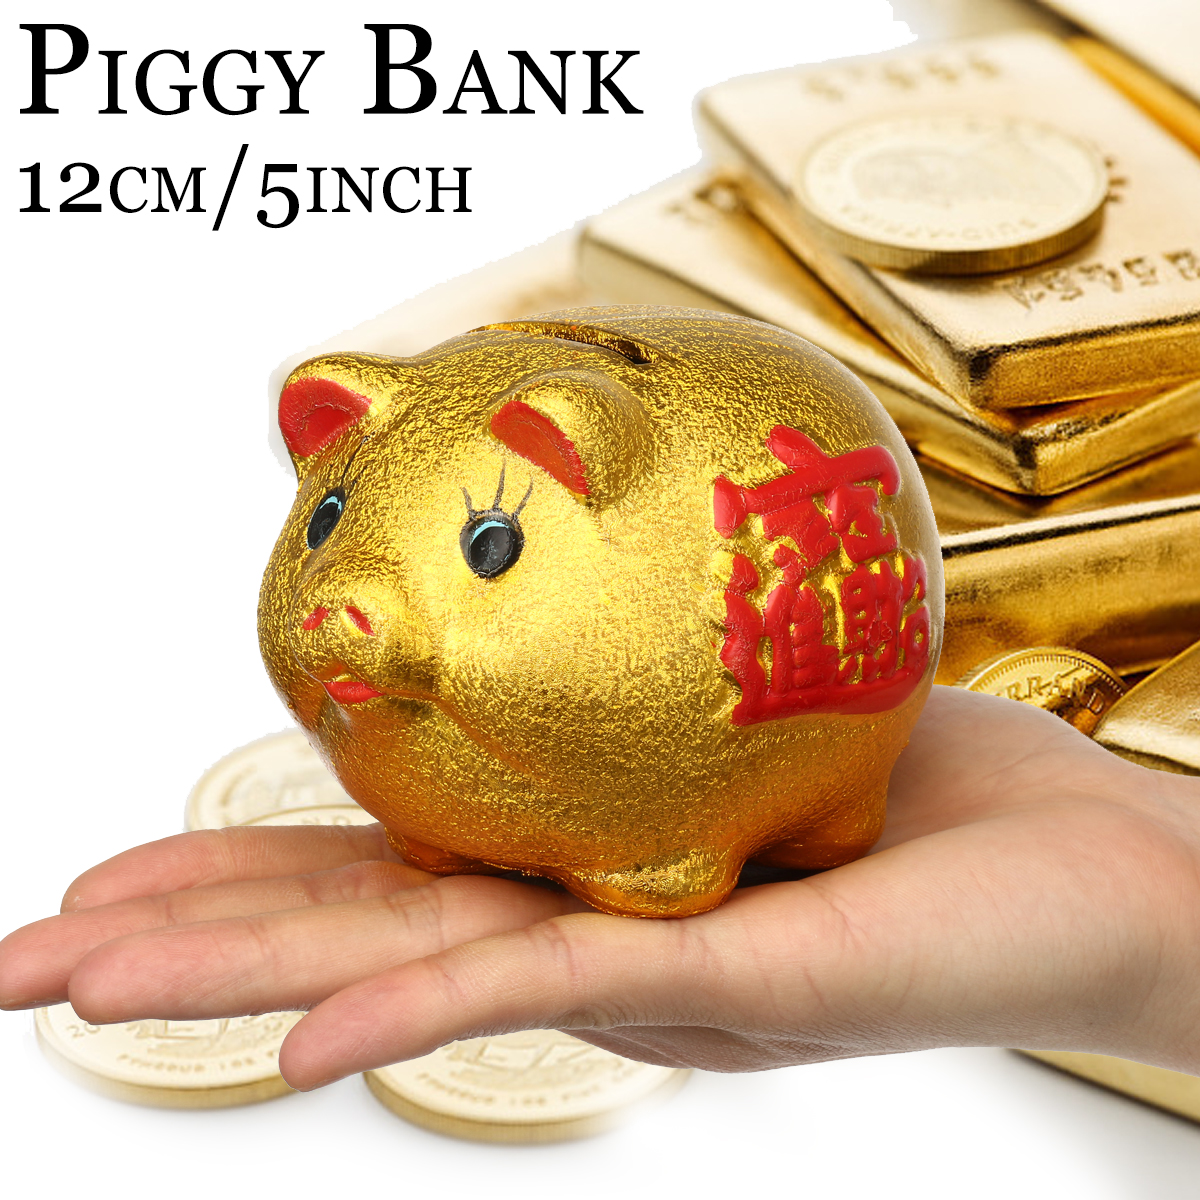 5-Gold-Ceramic-Piggy-Bank-Mini-Cute-Pig-Children-Coin-Collection-Gift-Decorations-1555224-10